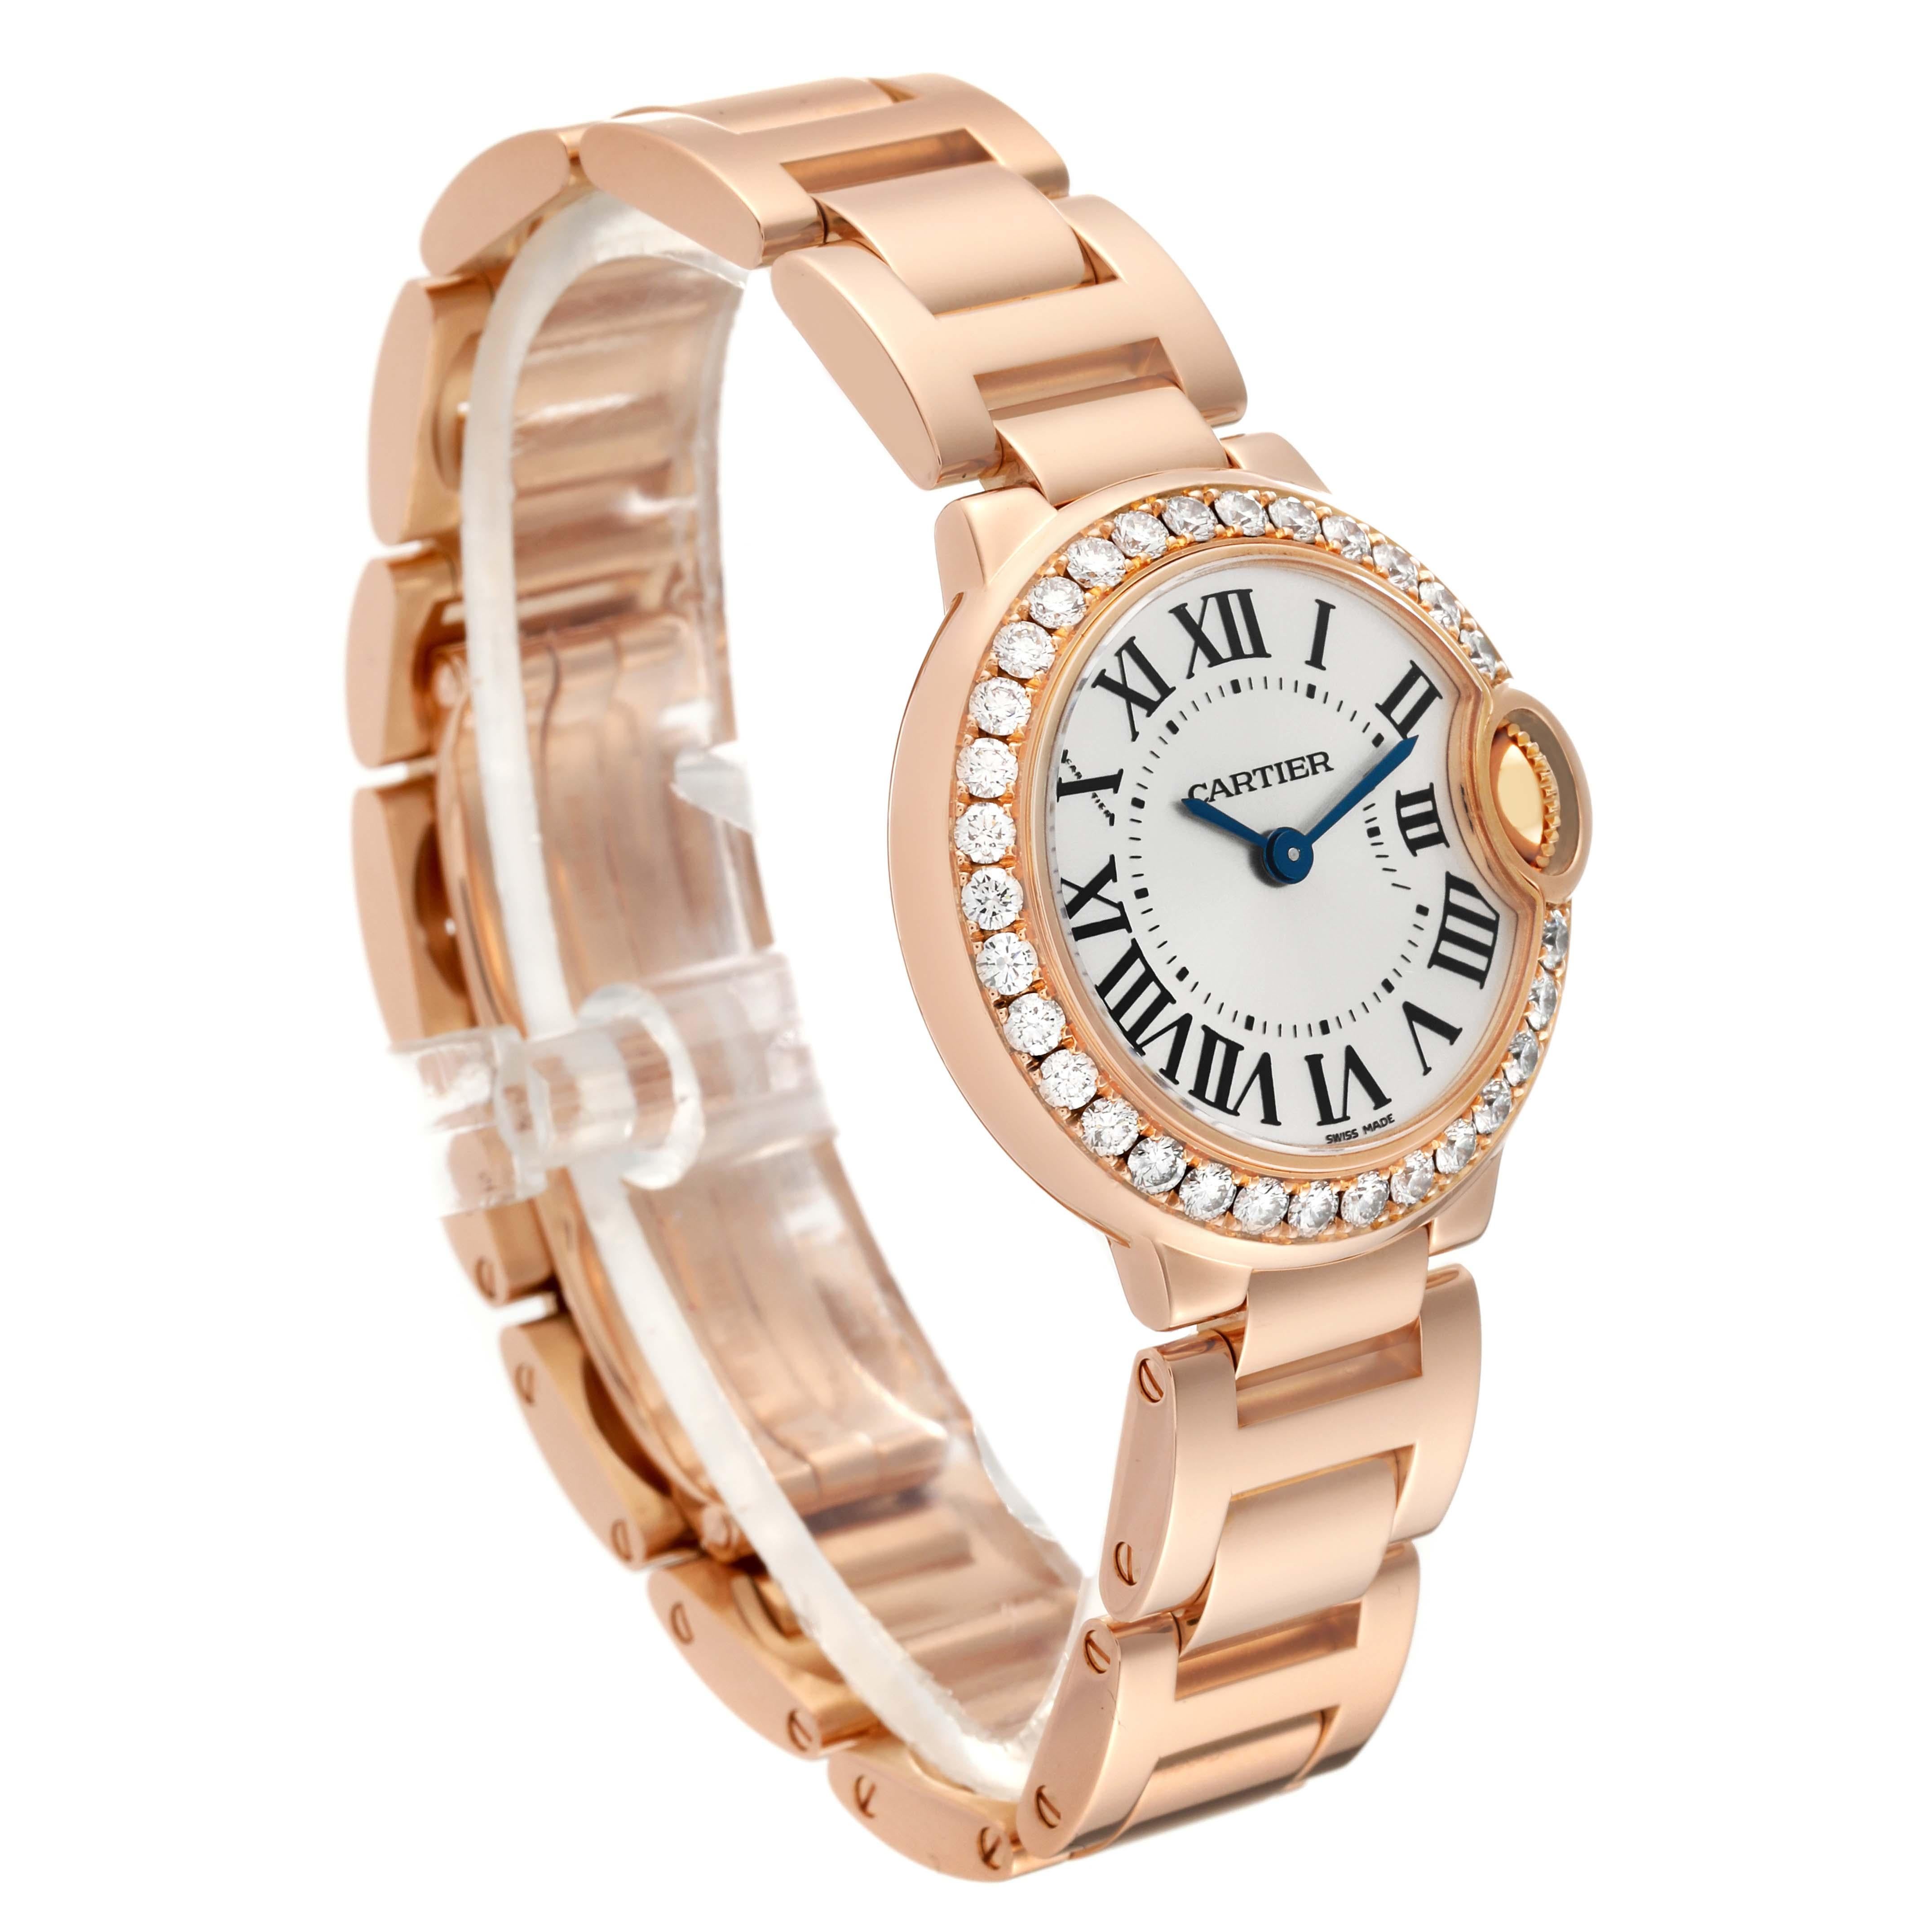 Cartier Ballon Blue Rose Gold Diamond Ladies Watch WJBB0015 In Excellent Condition For Sale In Atlanta, GA